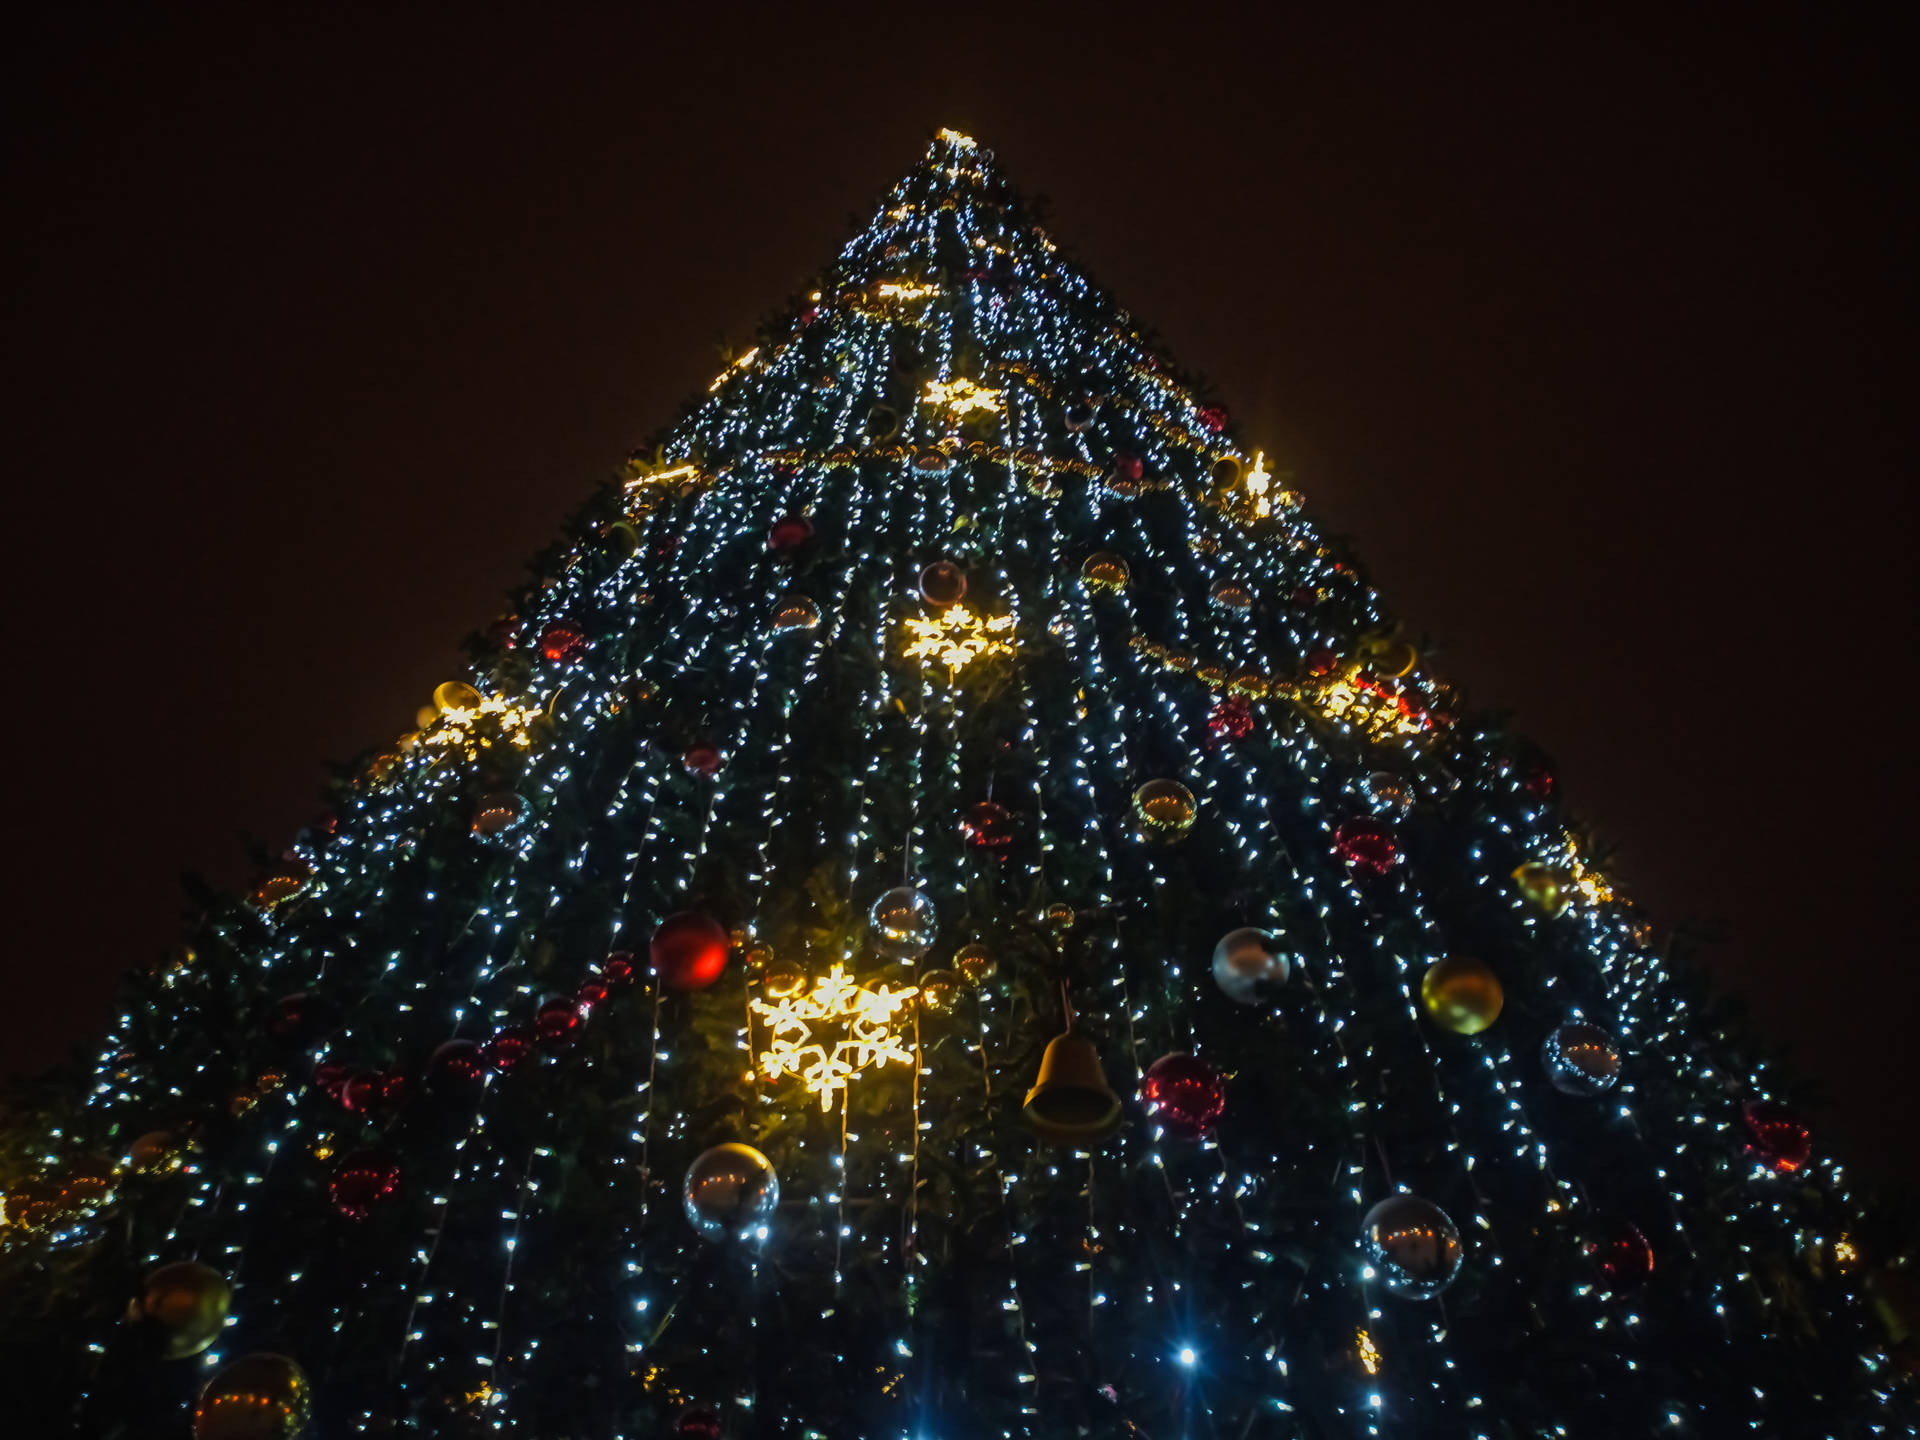 Aesthetic Christmas Tree With Lights Background